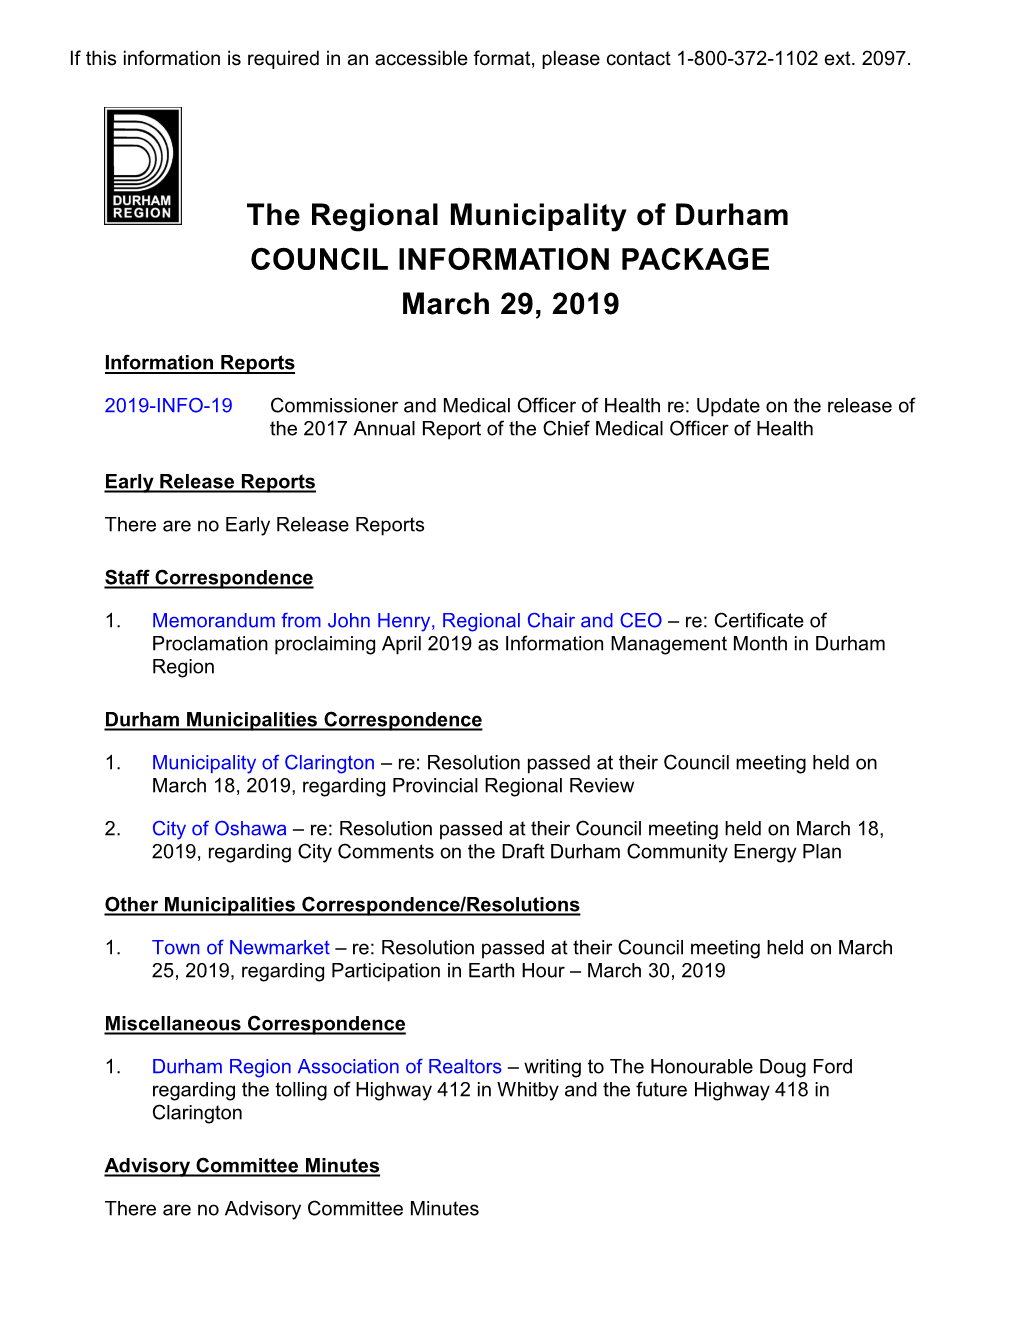 Council Information Package, March 29, 2019